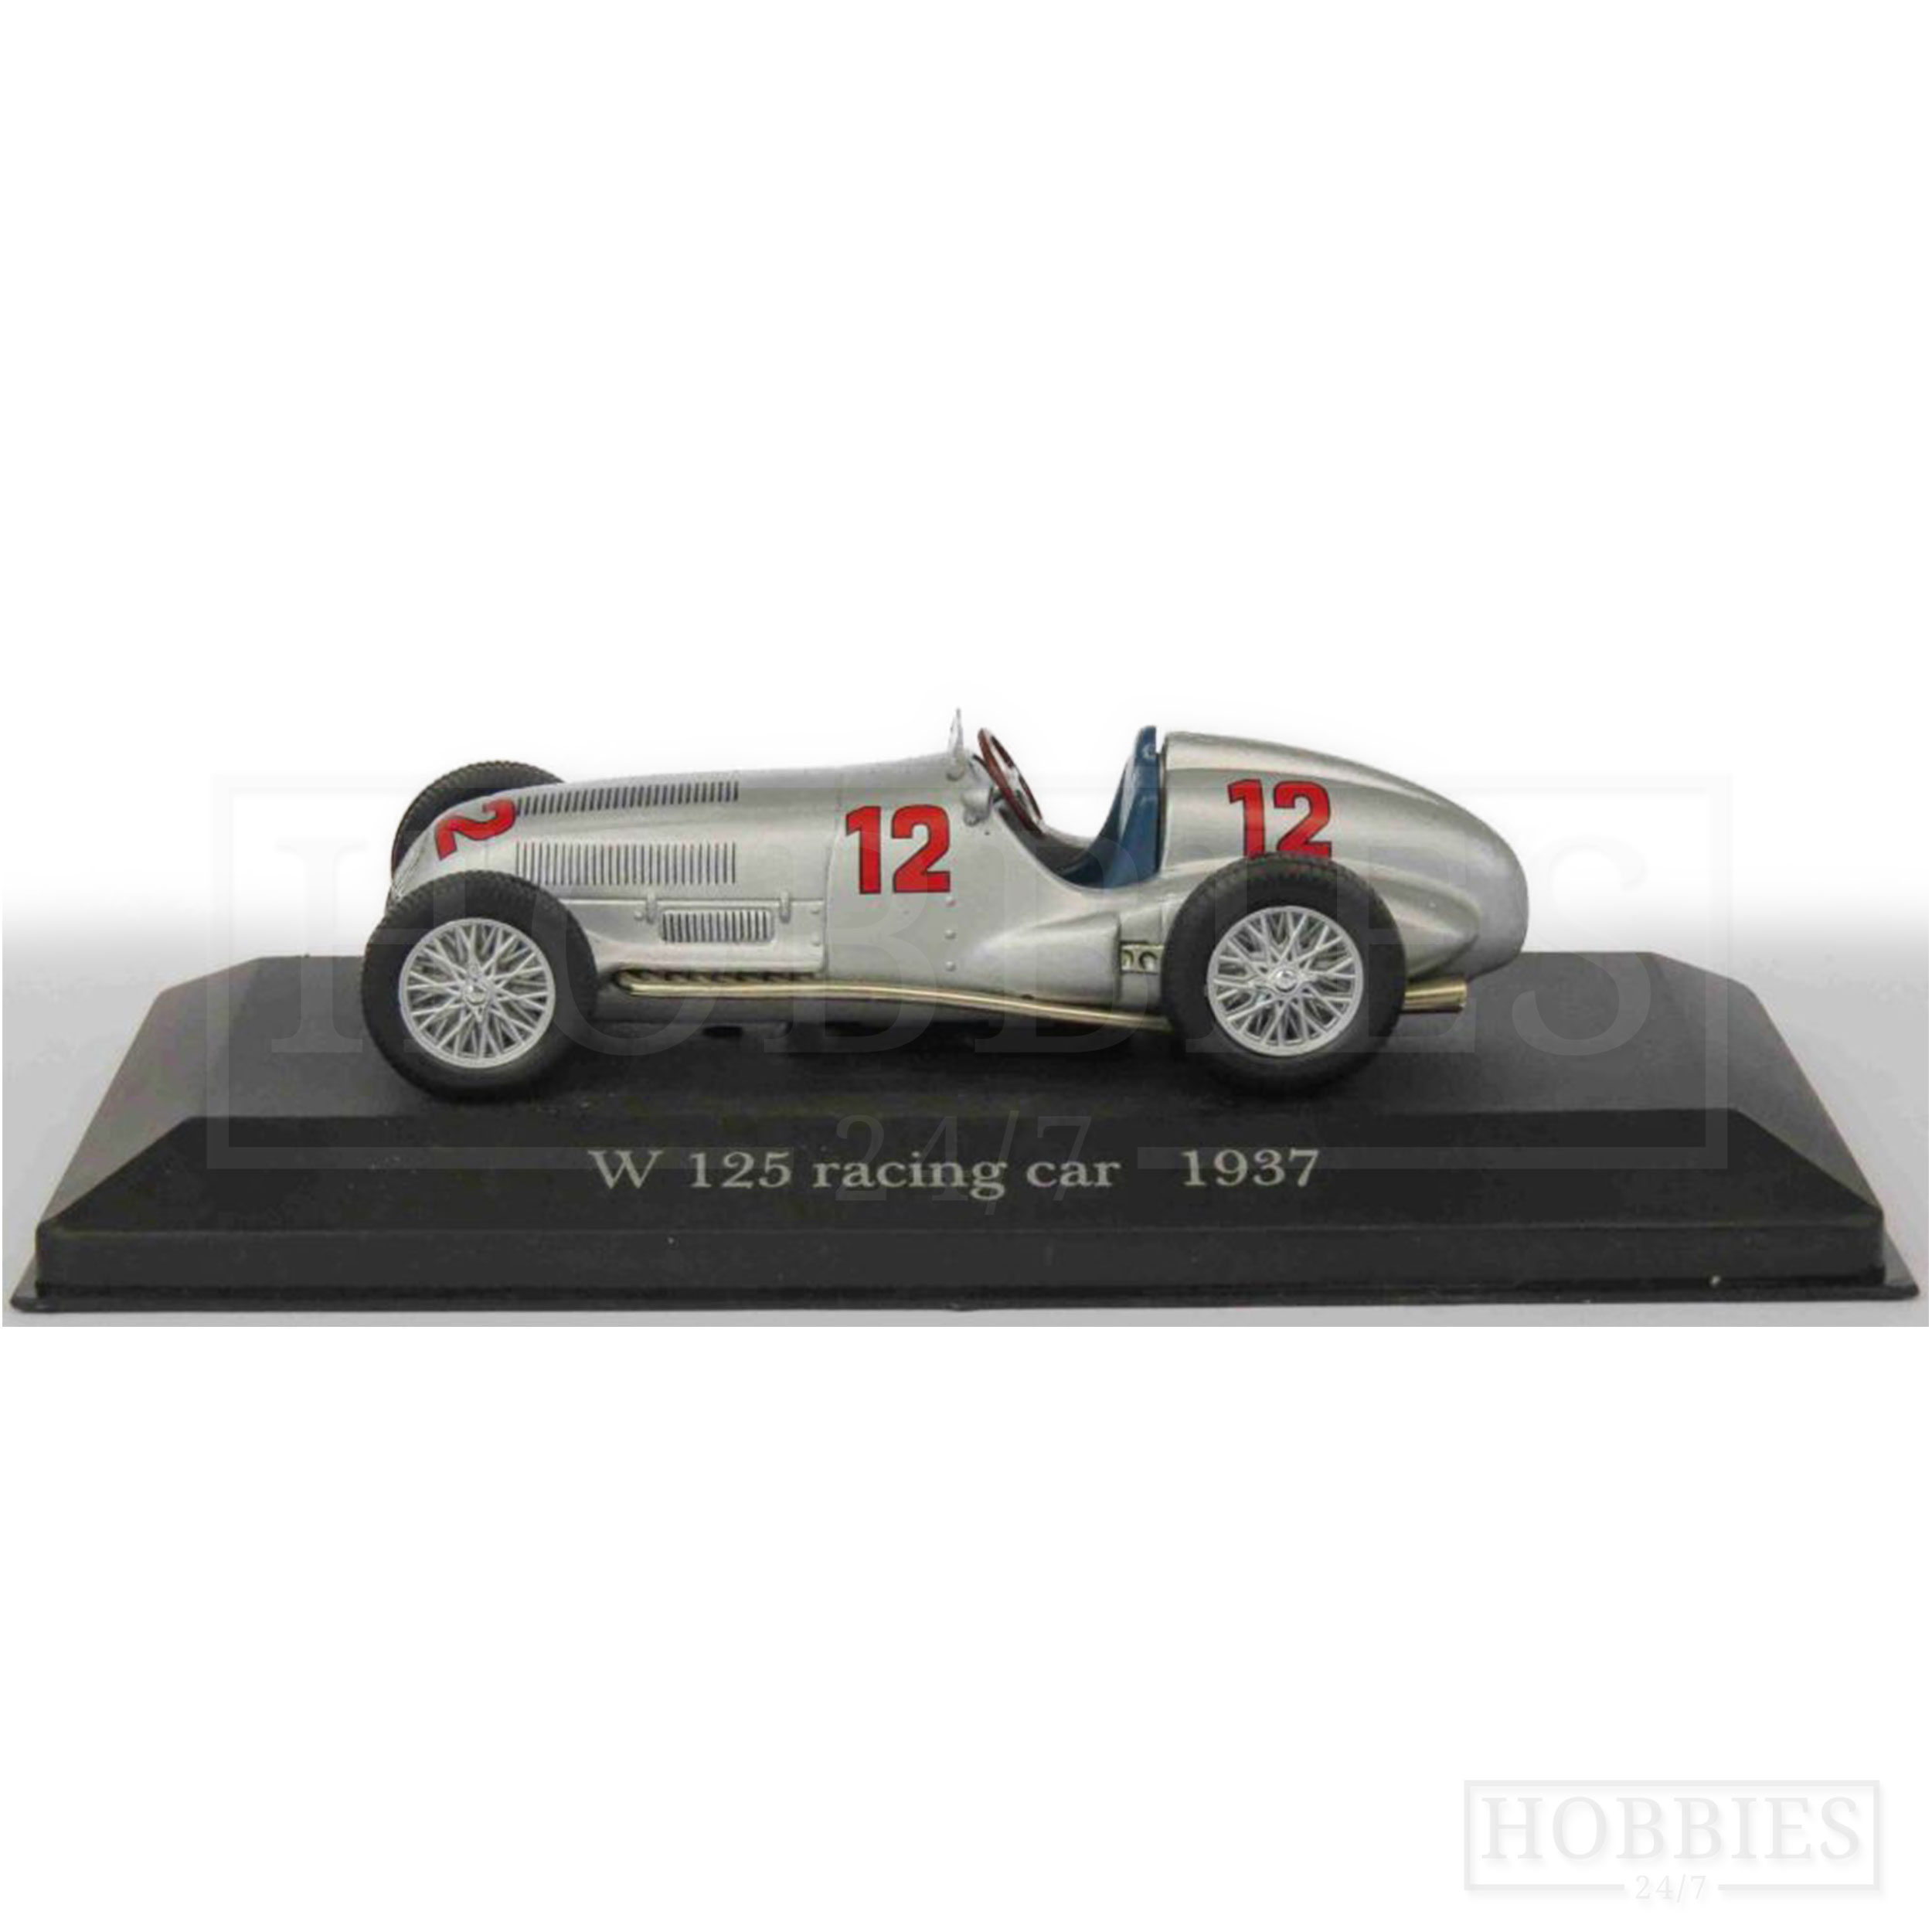 DIE CAST " W 125 RACING CAR 1937 " MERCEDES COLLECTION 1/43 41